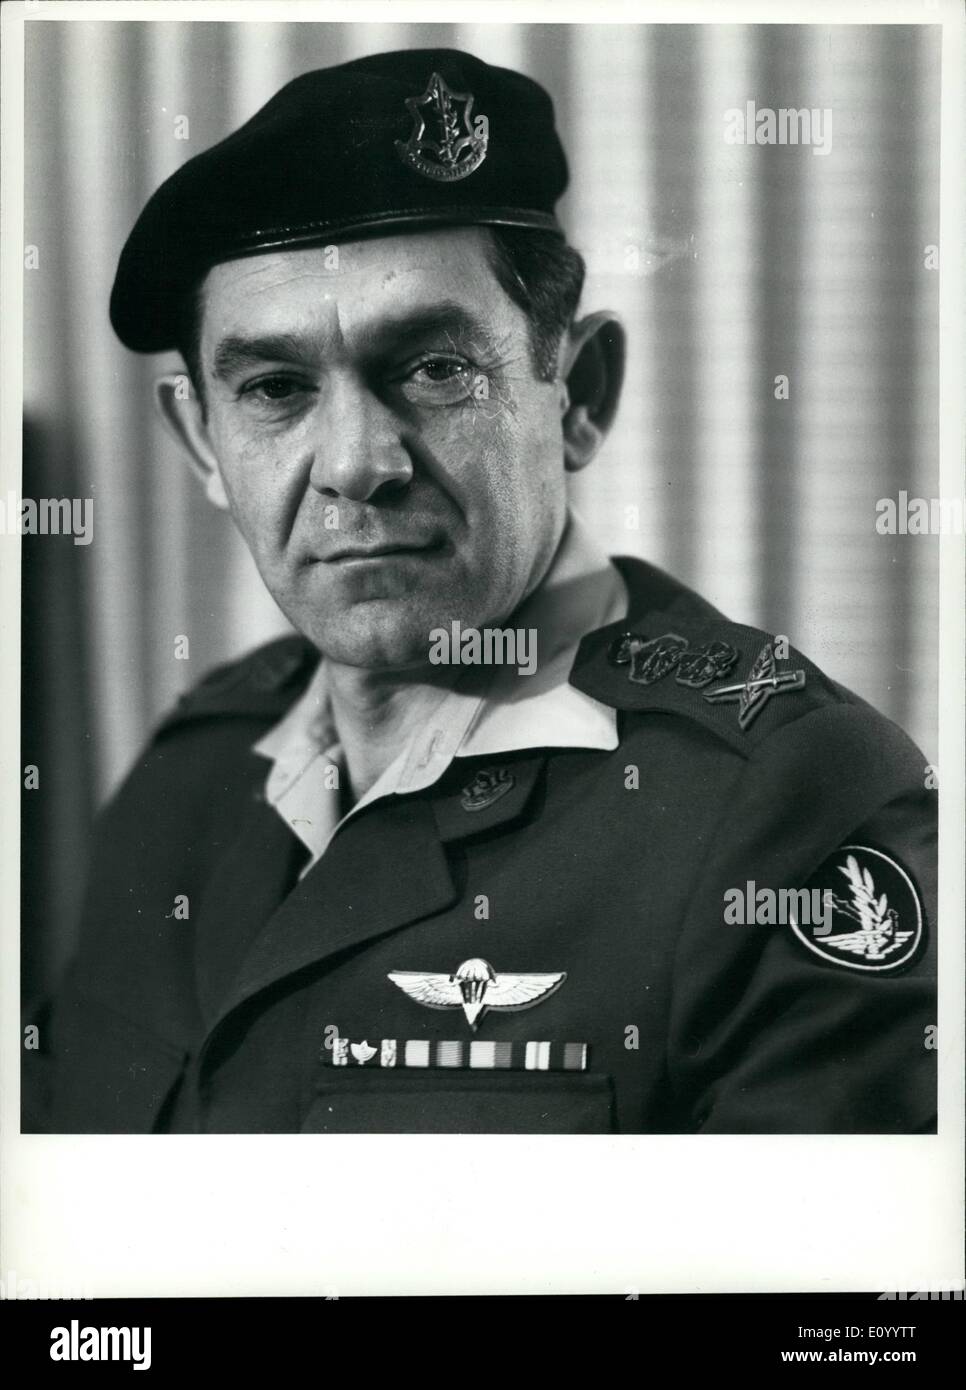 Dec. 12, 1971 - Israel's New Chief of Staff Photo Shows: Major Gen. David Elazar, who on January 1st. 1972 become Israel's new Chief of Staff. Stock Photo